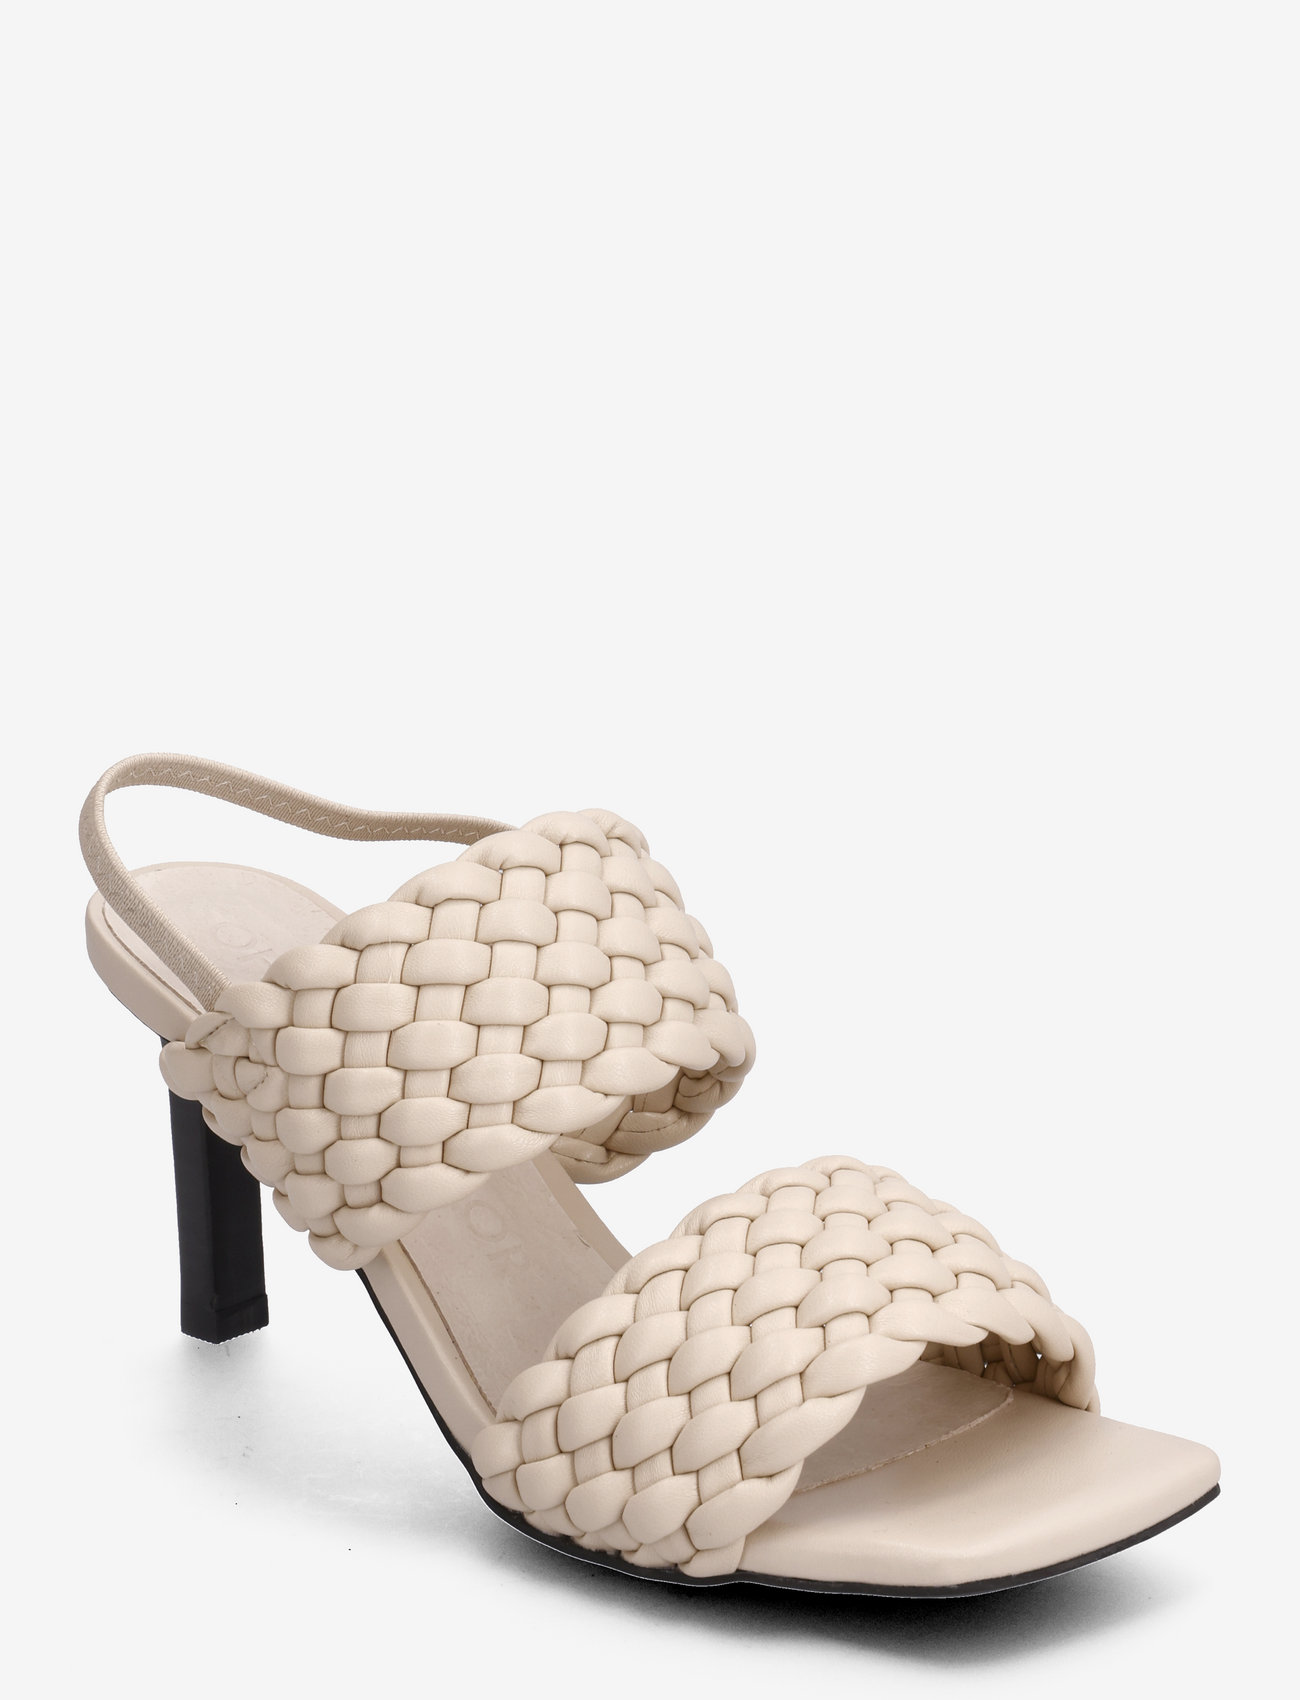 Sofie Schnoor - Sandal Boozt - party wear at outlet prices - off white - 0